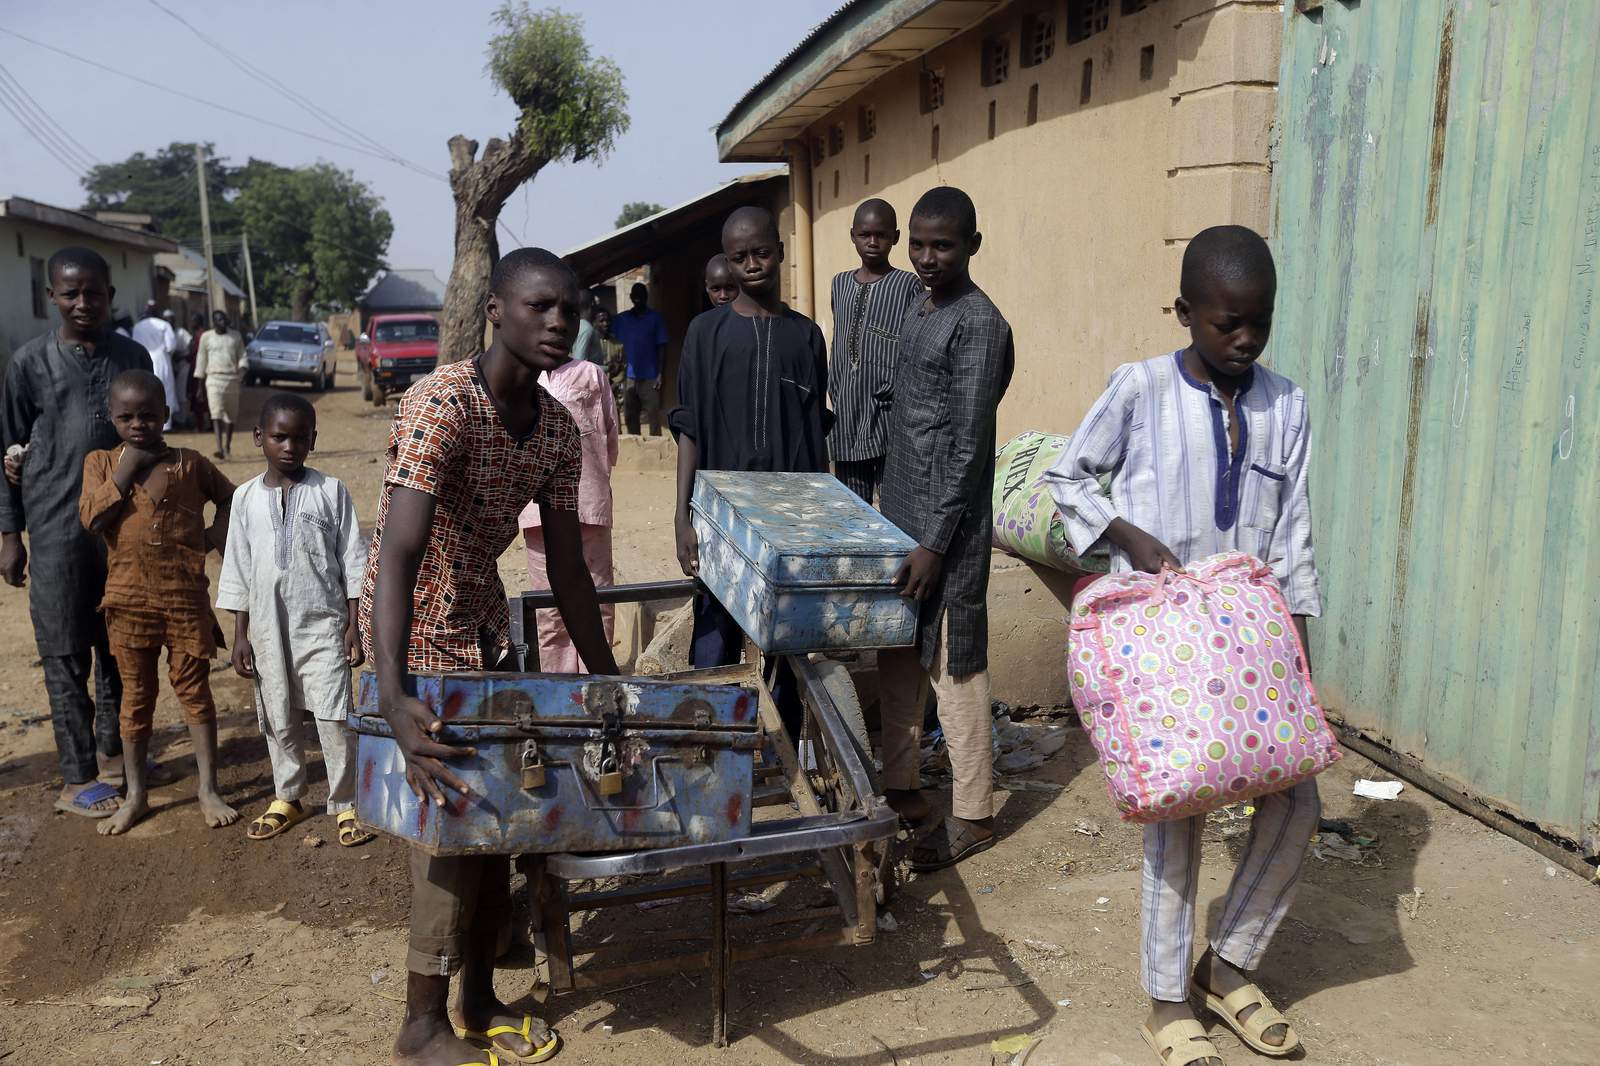 Kidnappings in north Nigeria highlight deepening insecurity